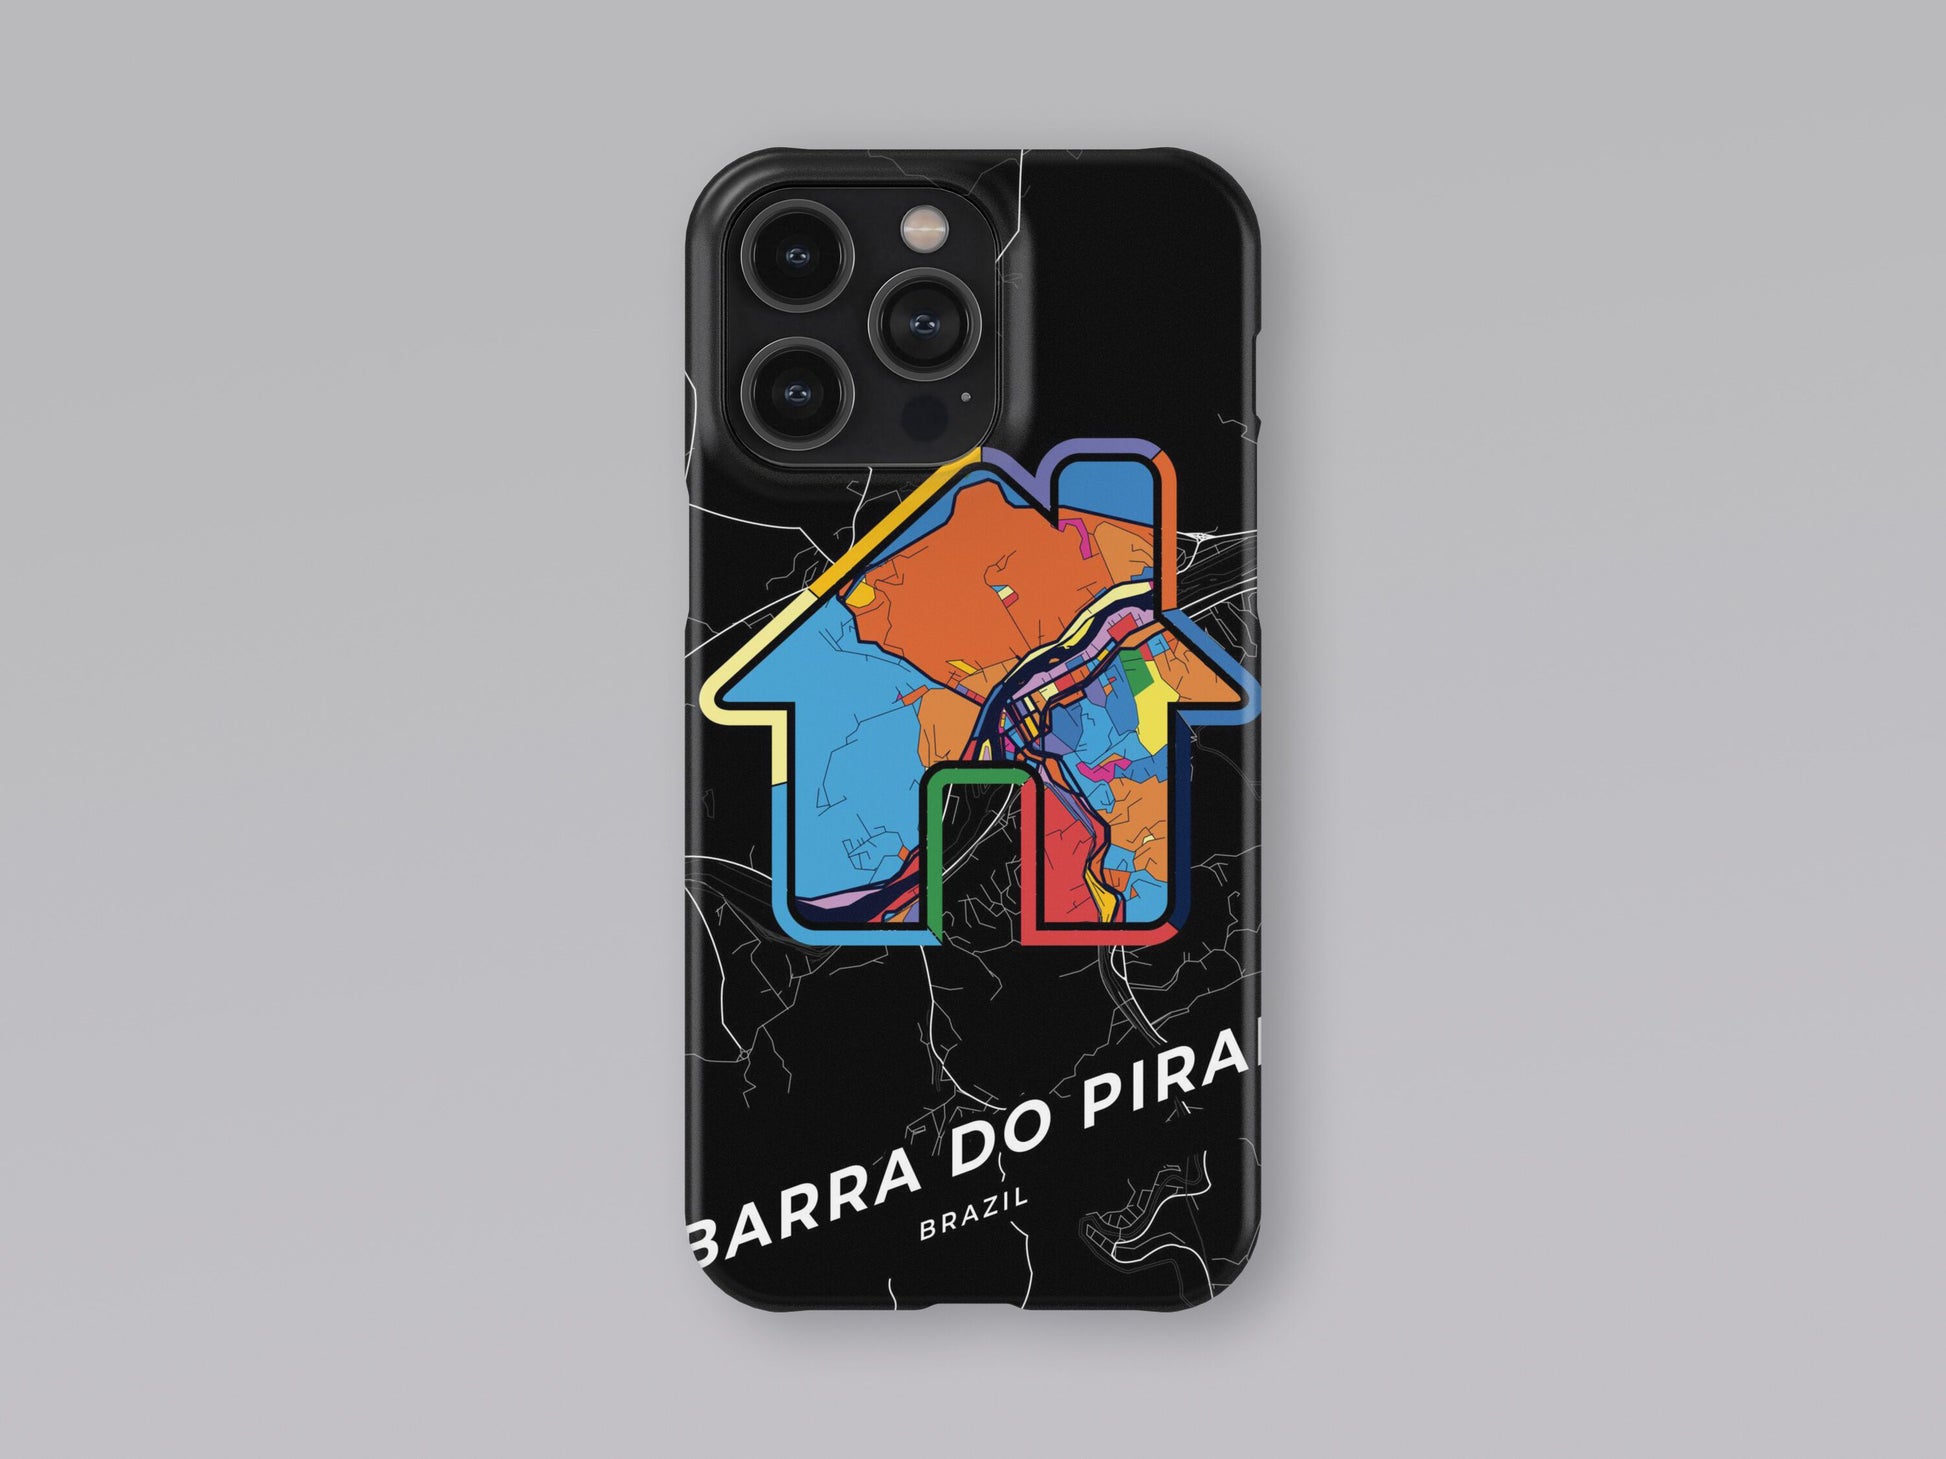 Barra Do Pirai Brazil slim phone case with colorful icon. Birthday, wedding or housewarming gift. Couple match cases. 3